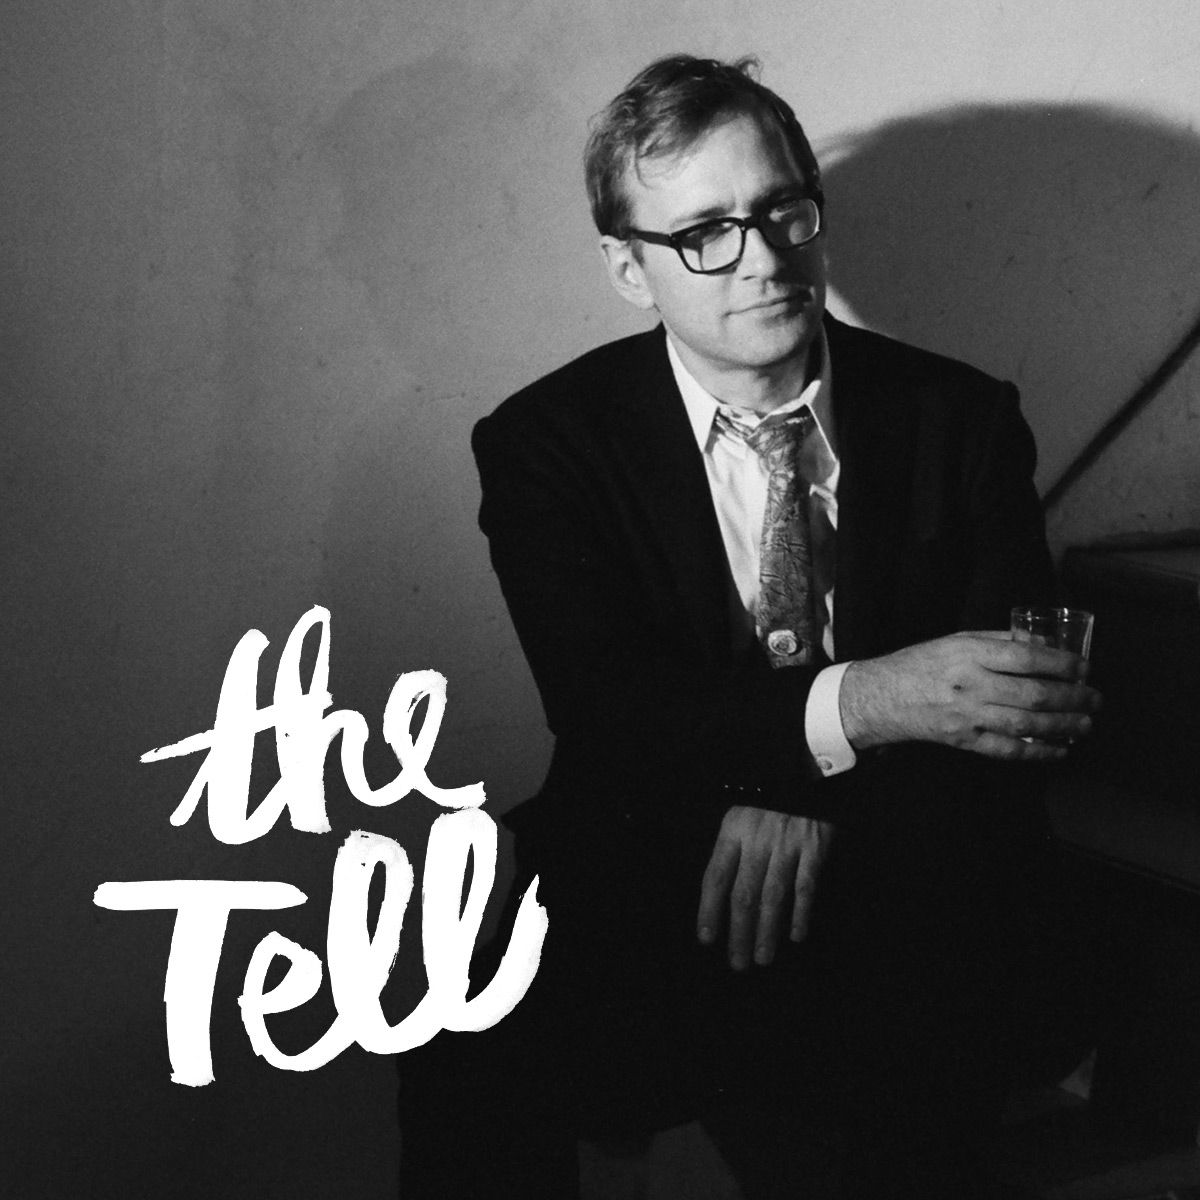 The Tell ep03 (Jack Dishel, Bryndon Cook, Aerial East)